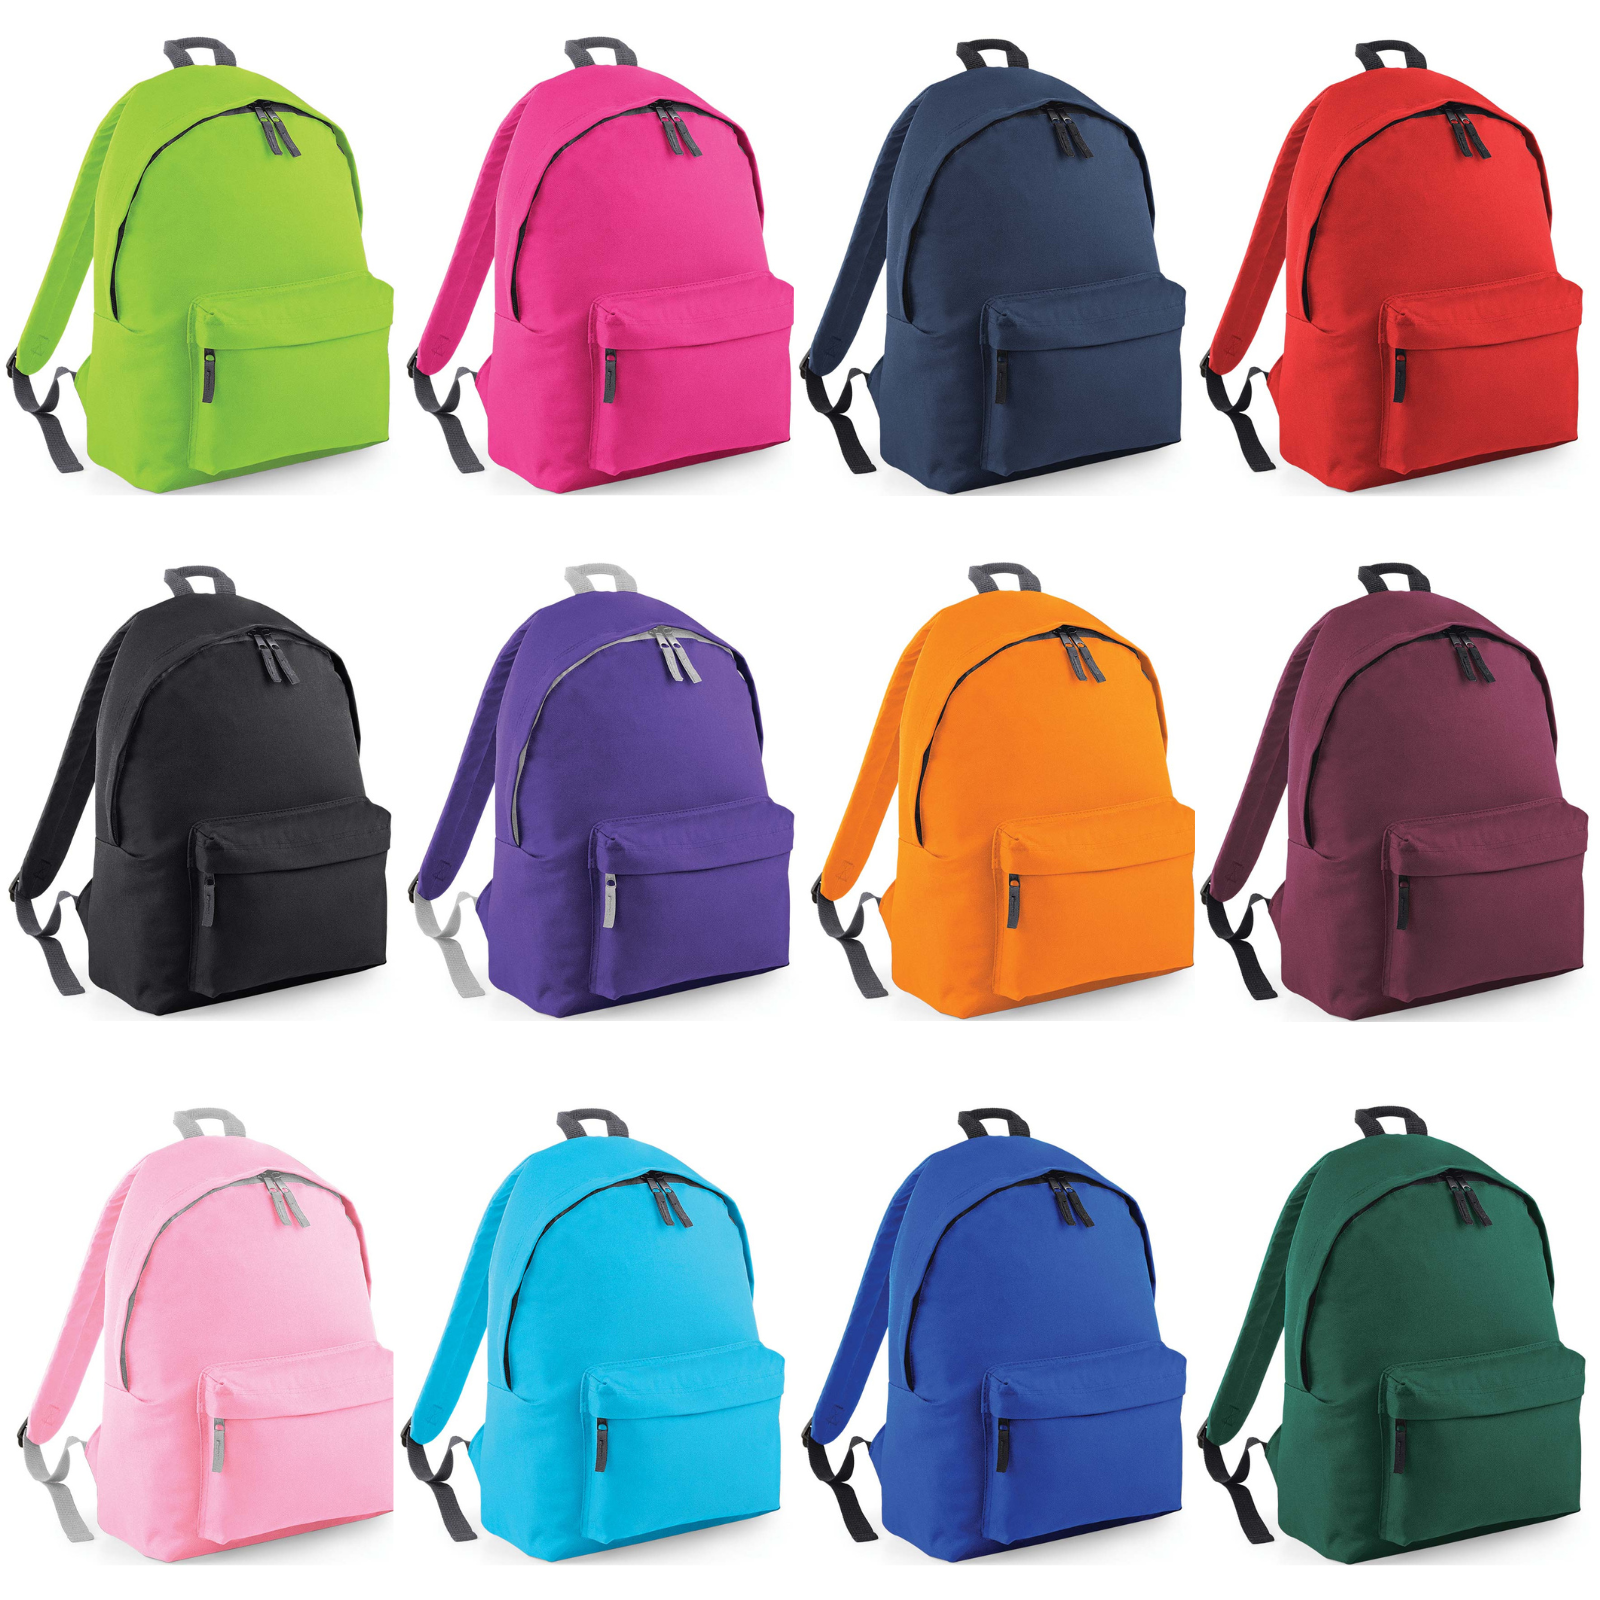 Image of the bag colour options for our junior rucksack with a dinosaur initial. The available colours are lime green, fuchsia pink, navy blue, red, black, purple, orange, burgundy, pink, surf blue, bright blue, dark green. The dinosaur initial will be embroidered in complementary colours to the bag.